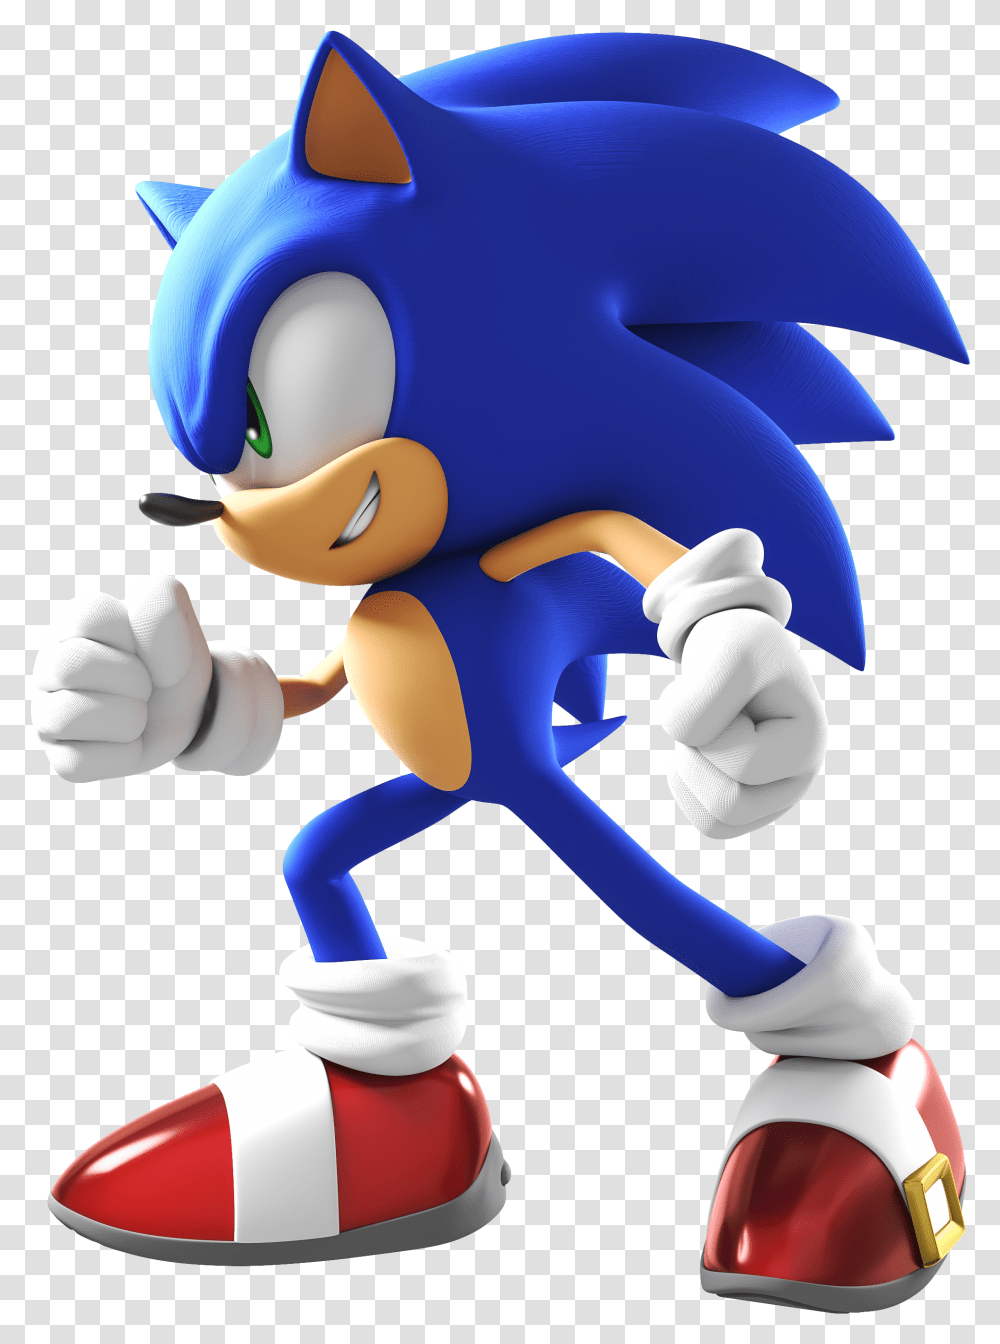 Mario And Sonic At The Olympic Games Render, Toy, Super Mario Transparent Png